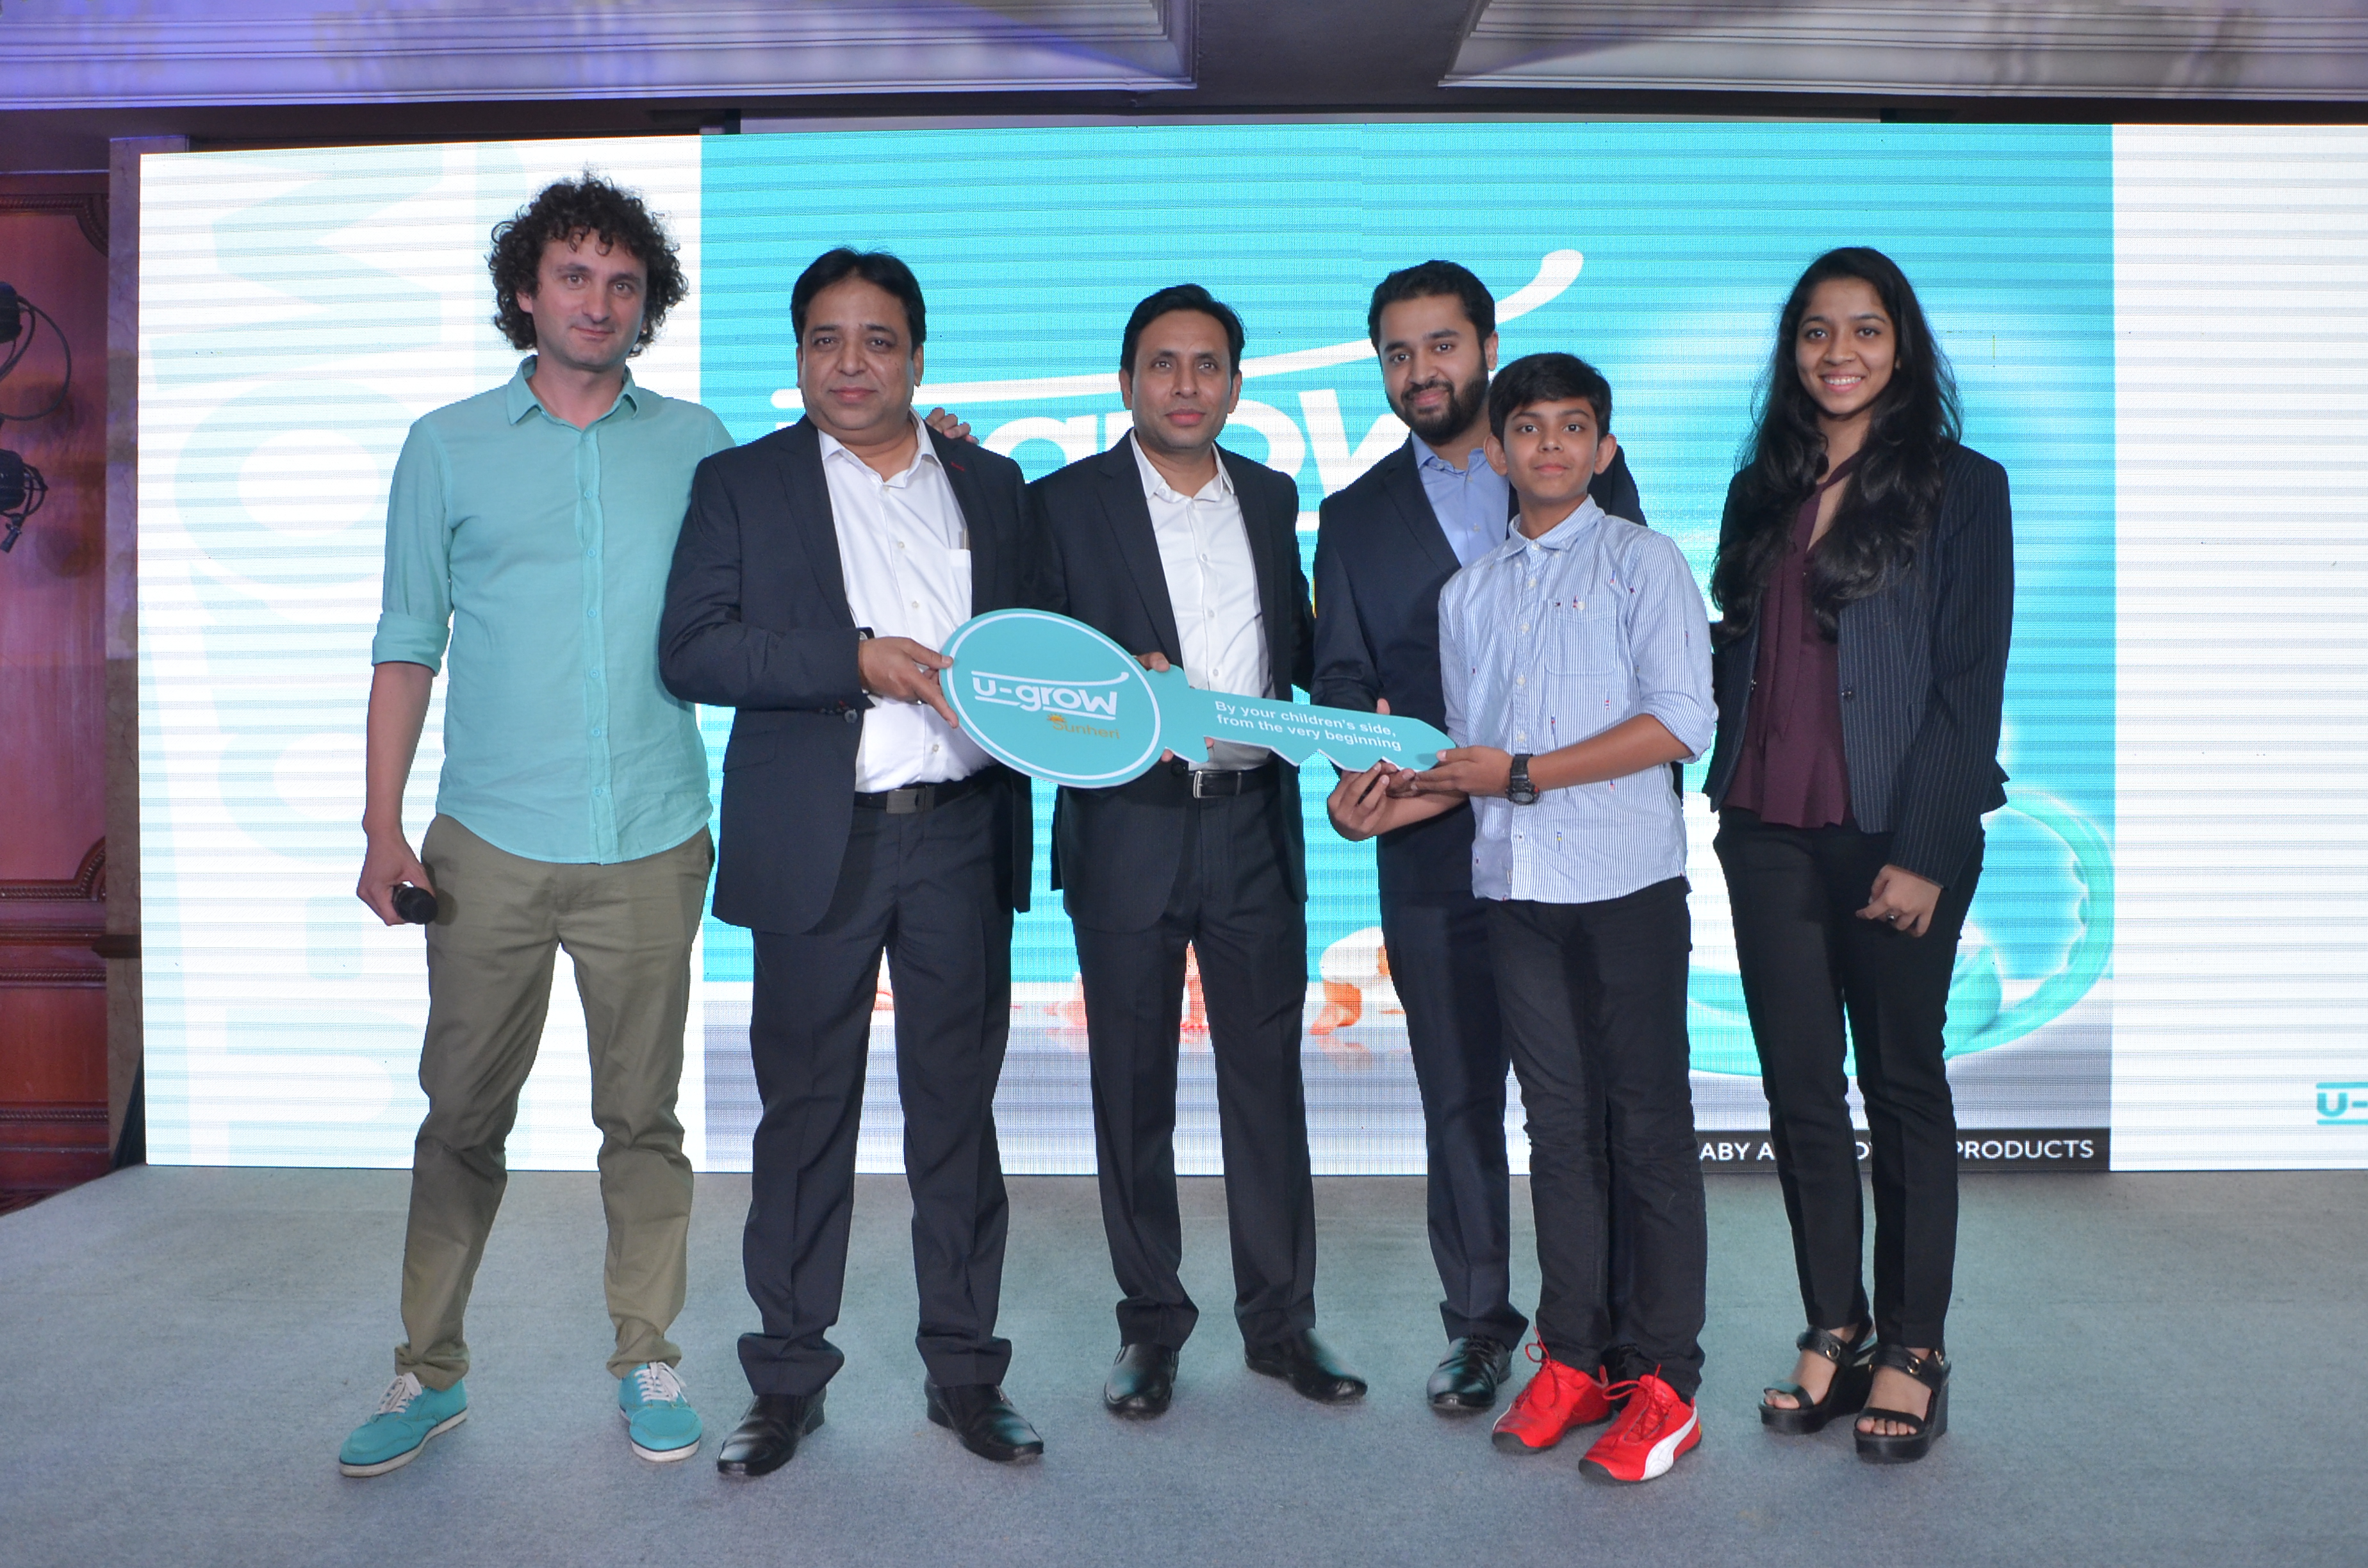 U Grow event launch in india